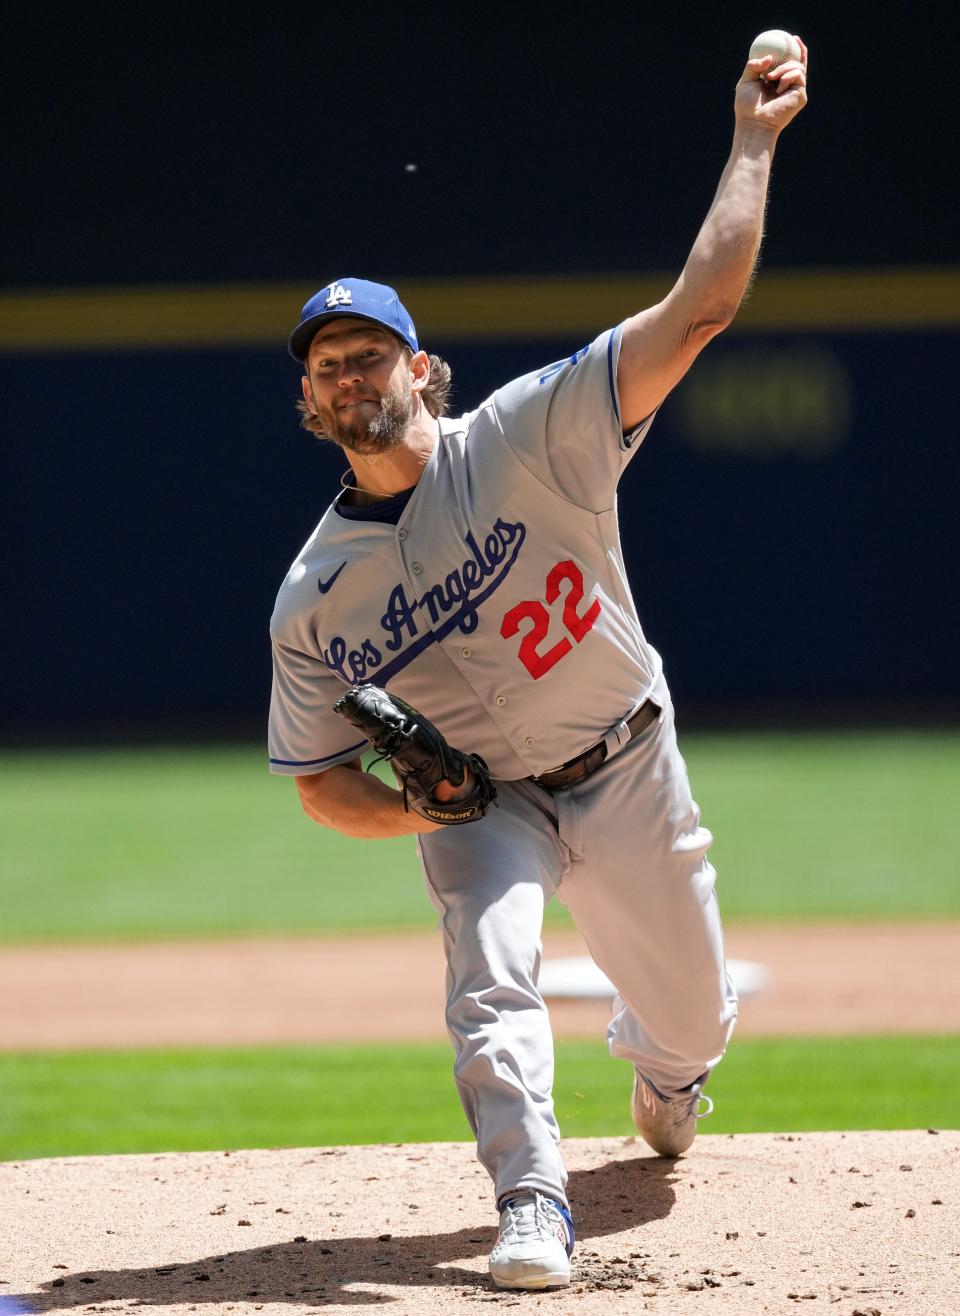 Los Angeles Dodgers starting pitcher Clayton Kershaw limited the Brewers to one run over seven innings on Wednesday.